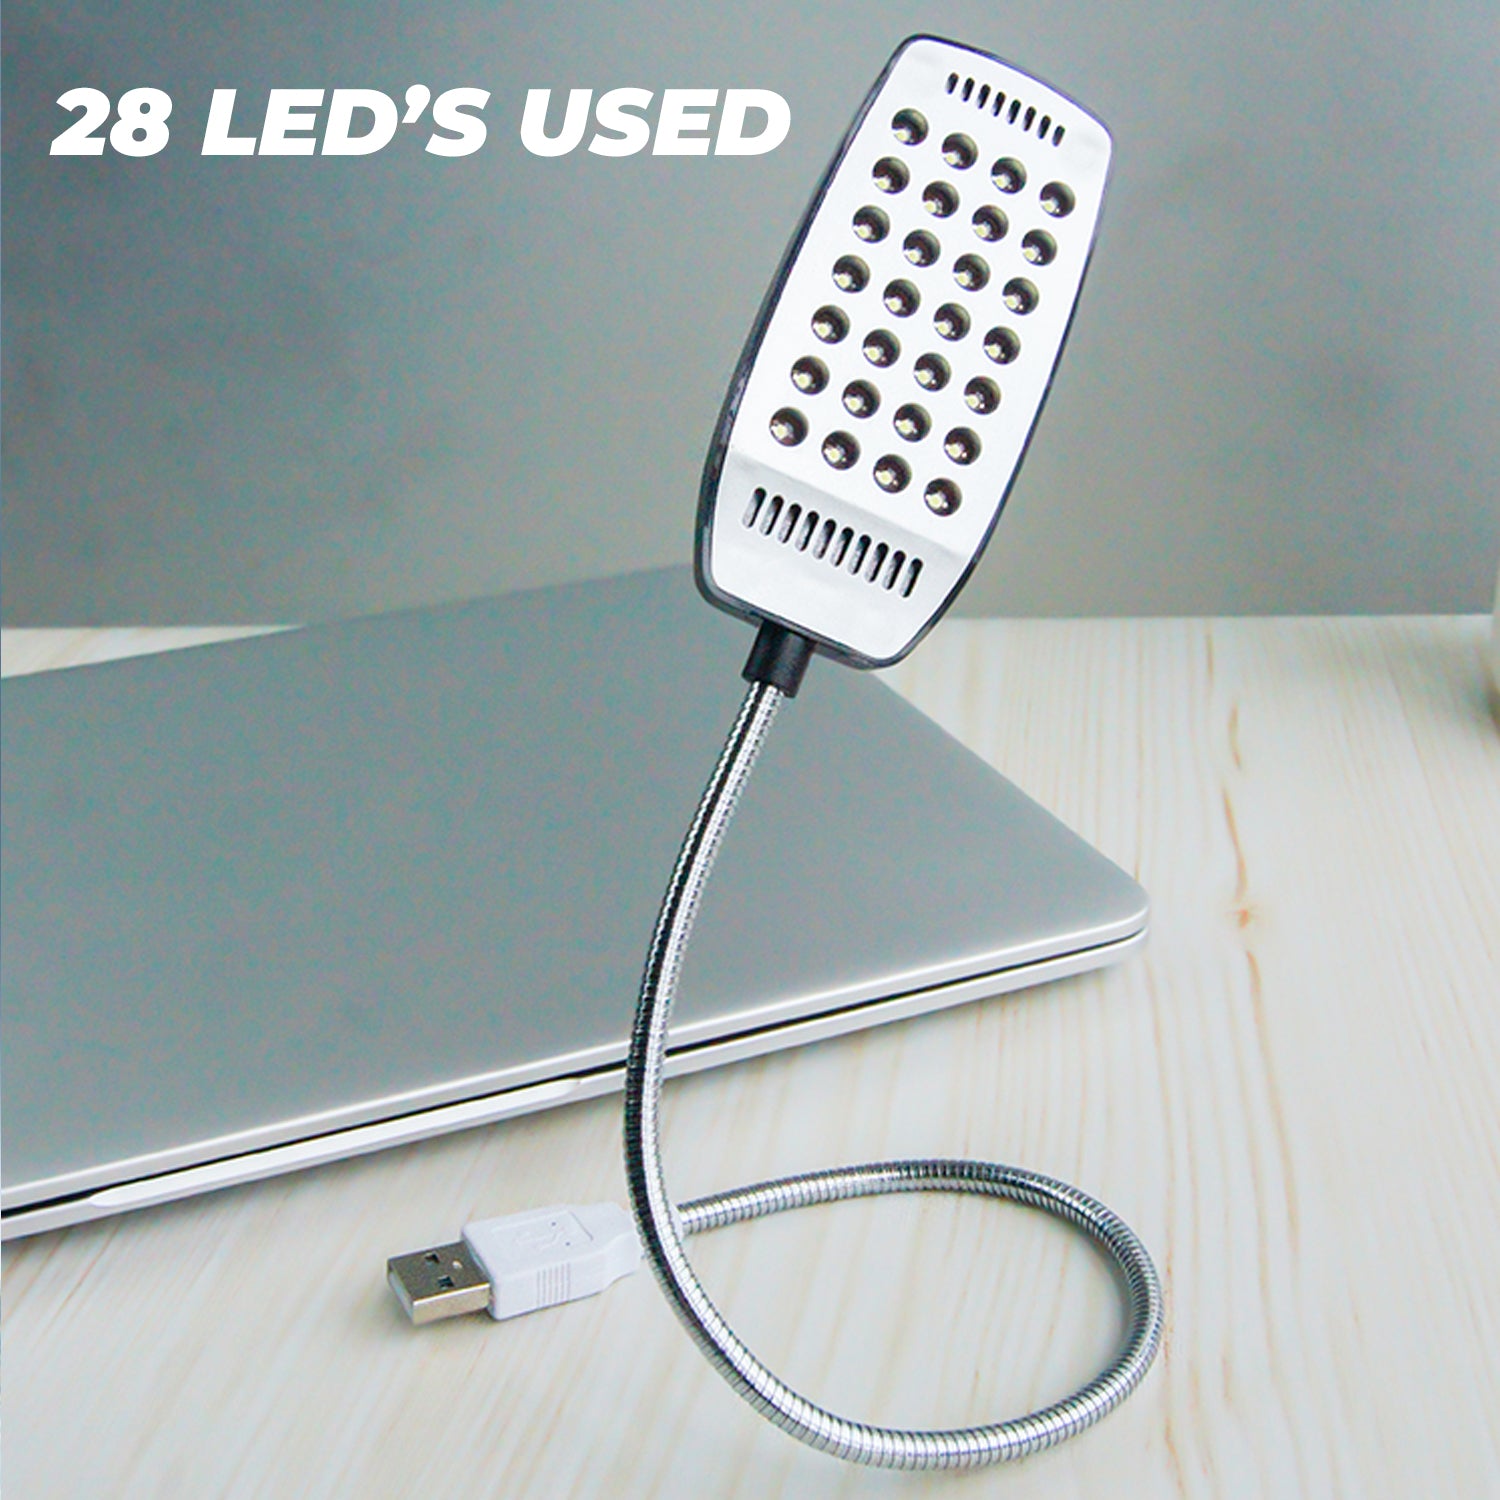 PickTheDeal Flexible Portable Bendable Lamp USB LED Light (Colour May Vary)  -Combo of 10